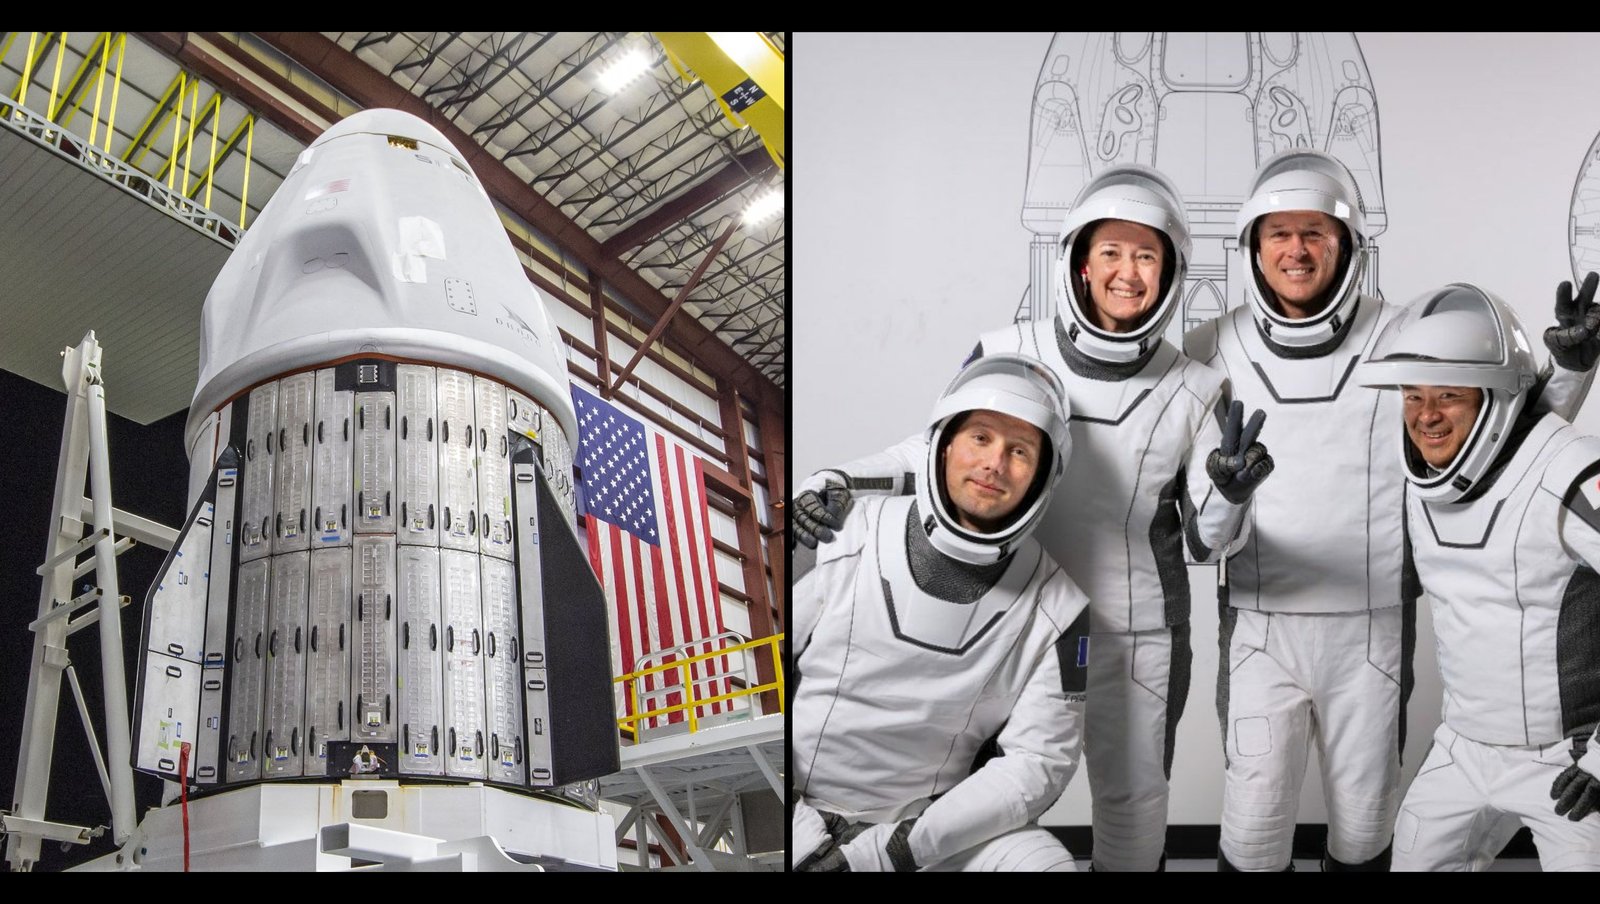 SpaceX and NASA are officially “go” to launching Crew-2 astronauts to International Space Station on Earth Day